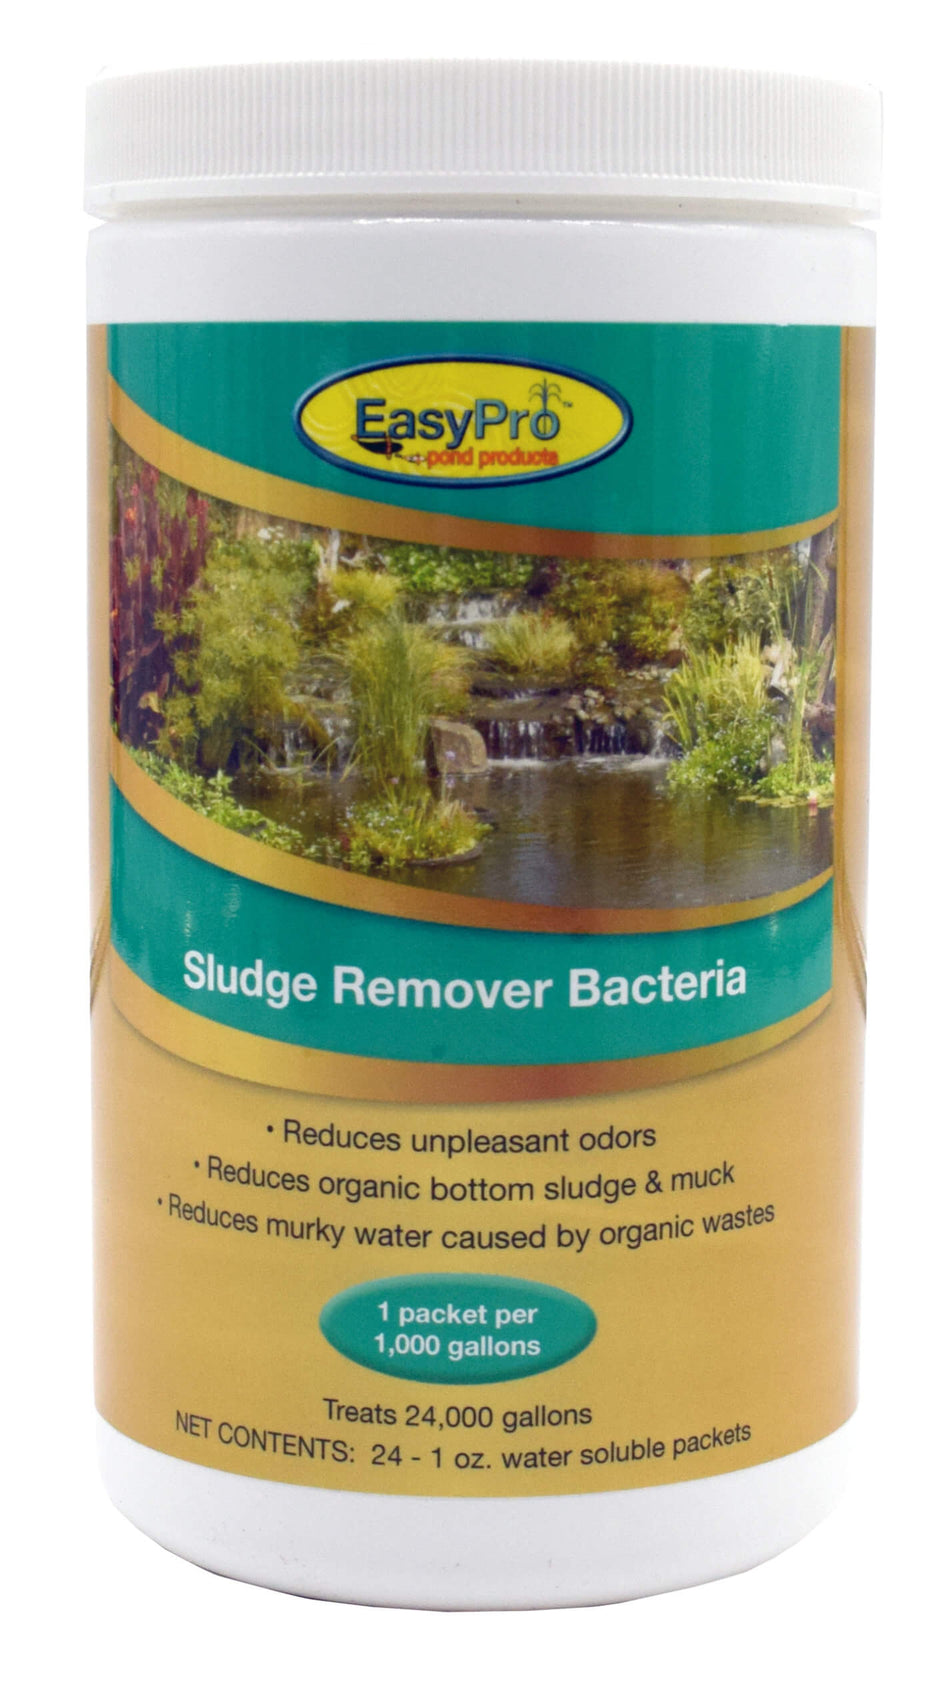 Easy Pro Sludge Remover Bacteria Water Soluble Packs